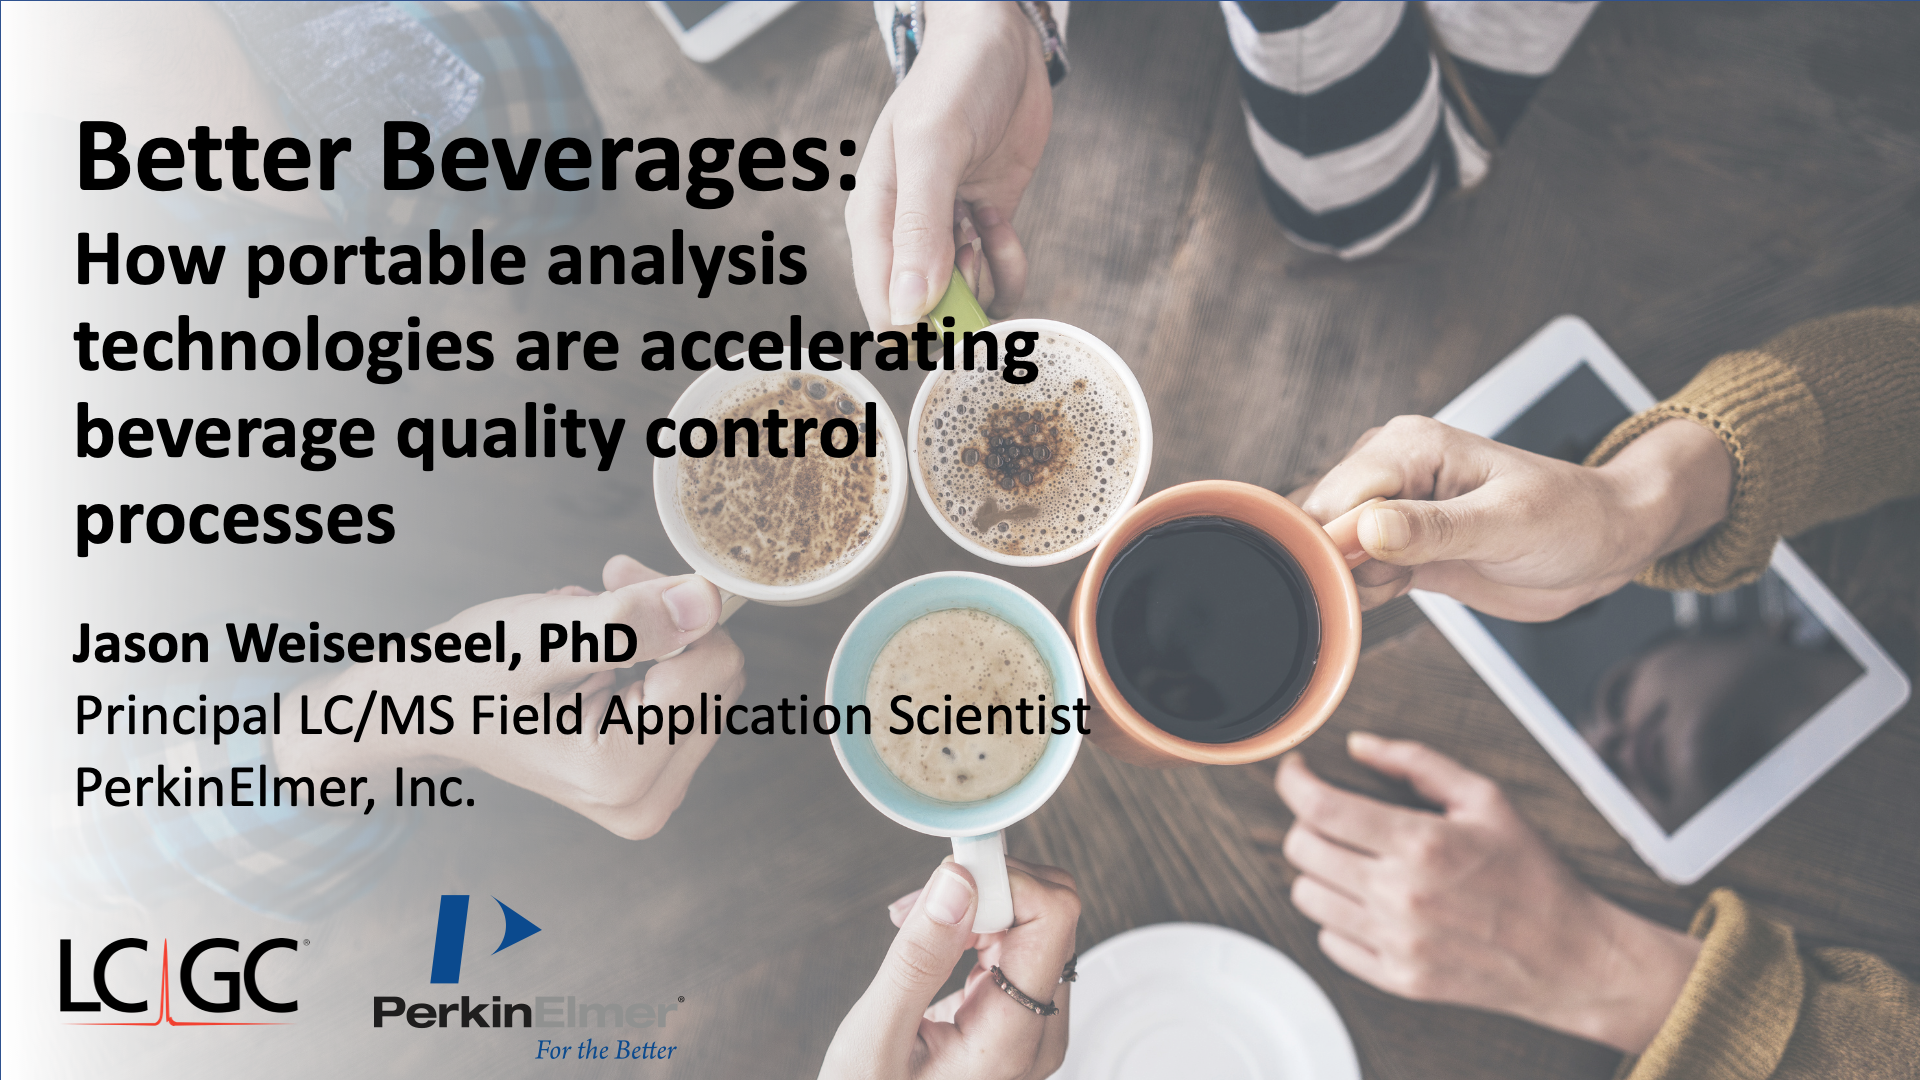 Better Beverages: How portable analysis technologies are accelerating beverage quality control processes